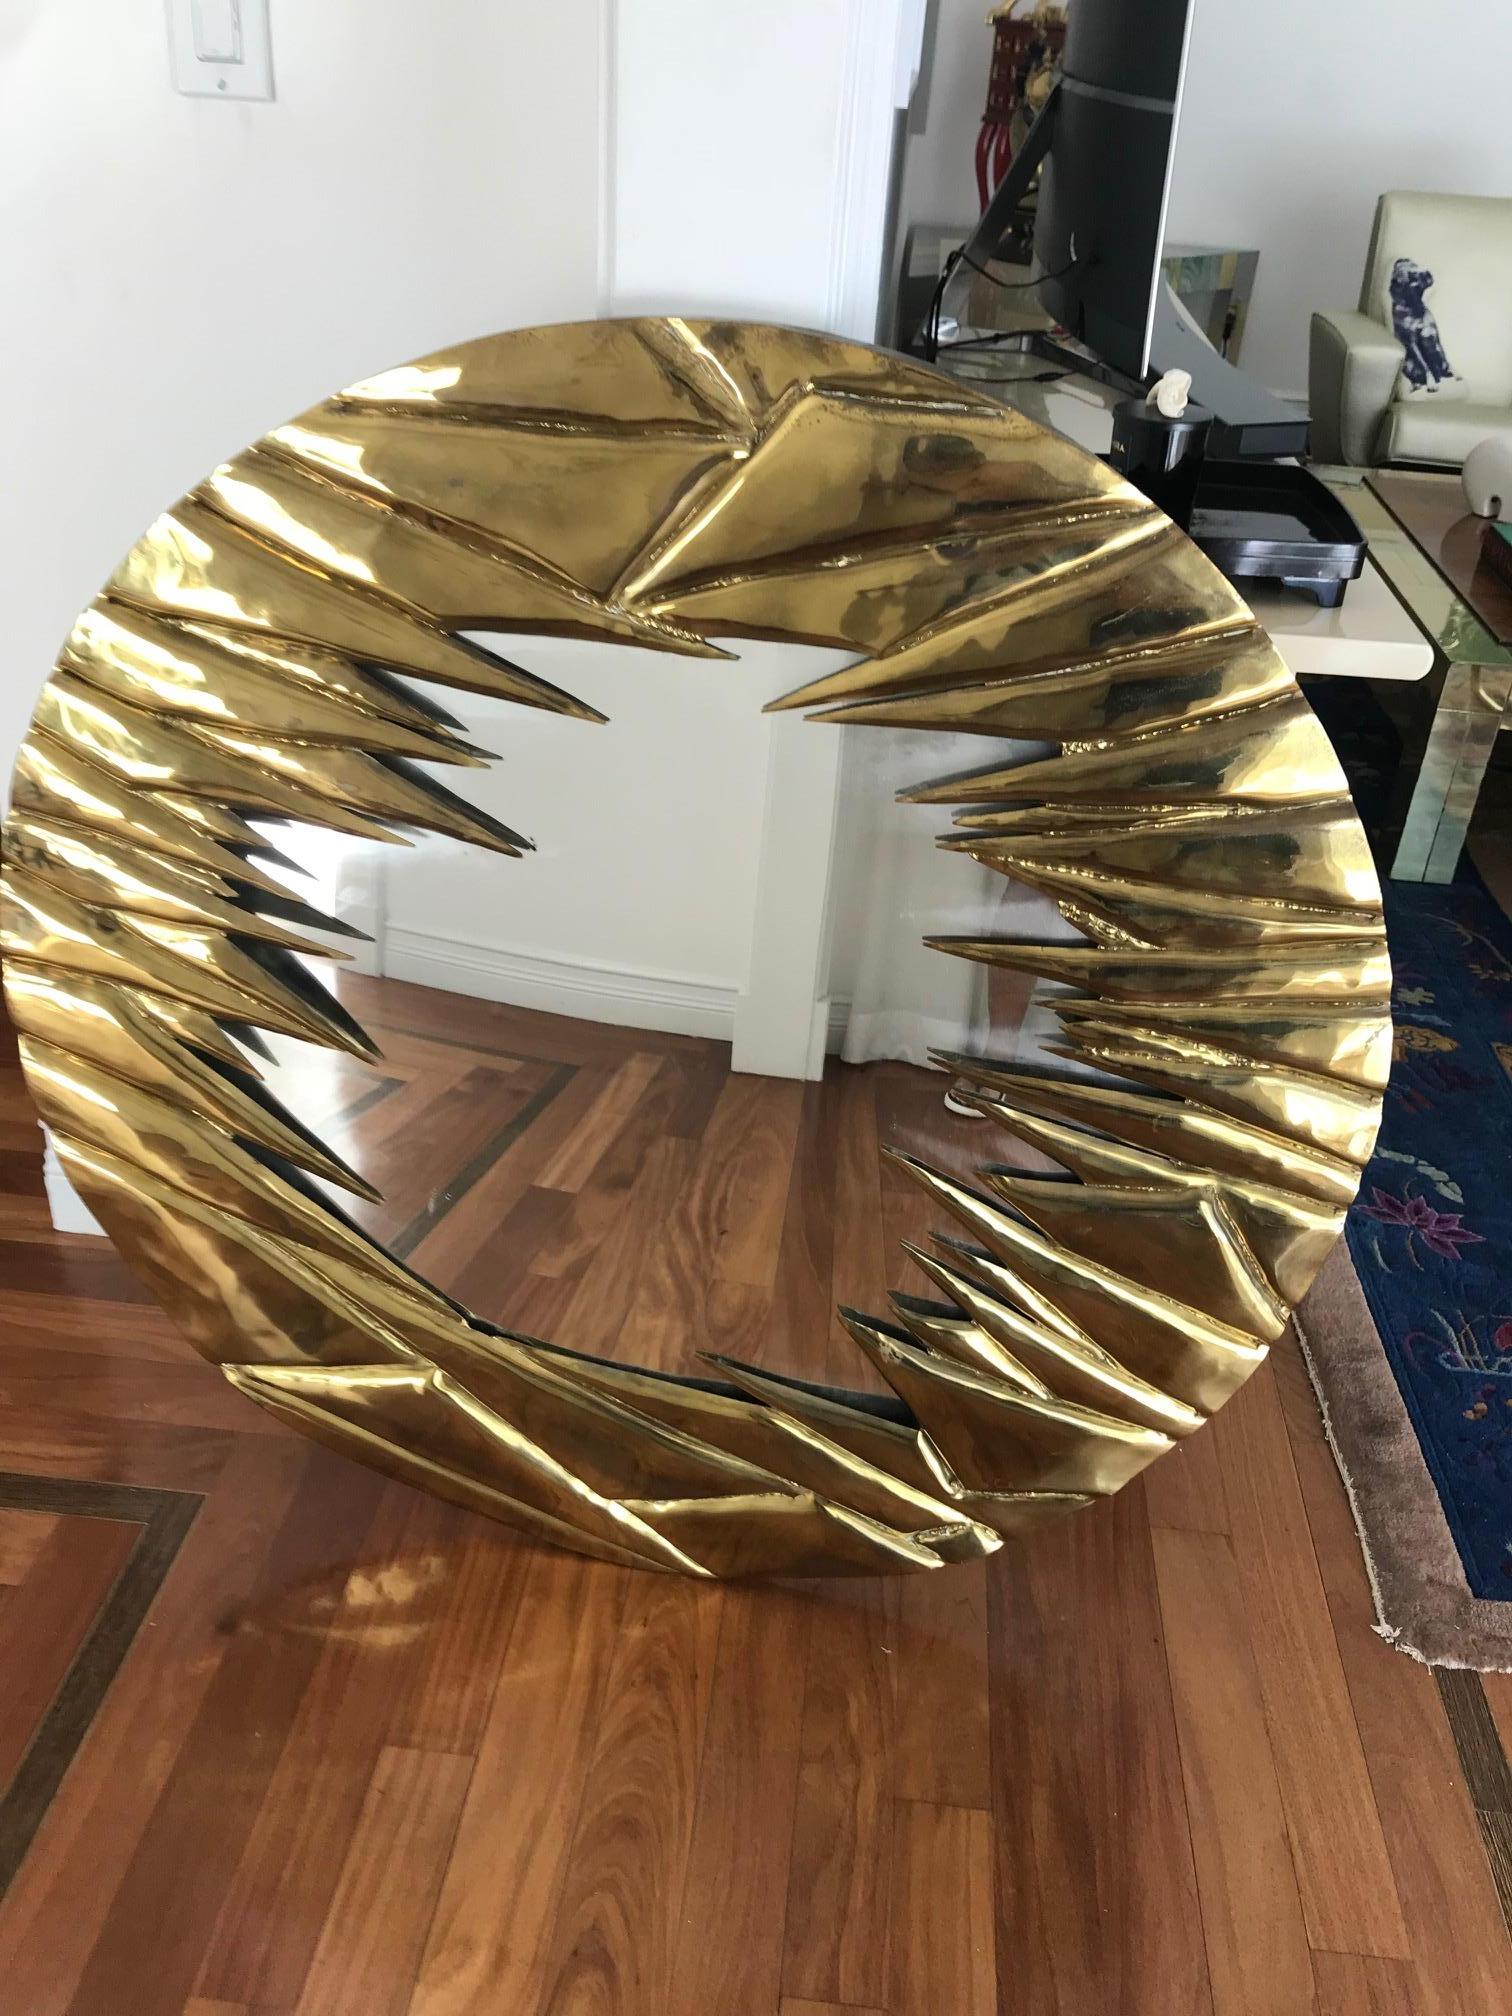 Late 20th Century French Brass Artisanal Mirror by Alain Chevert For Sale